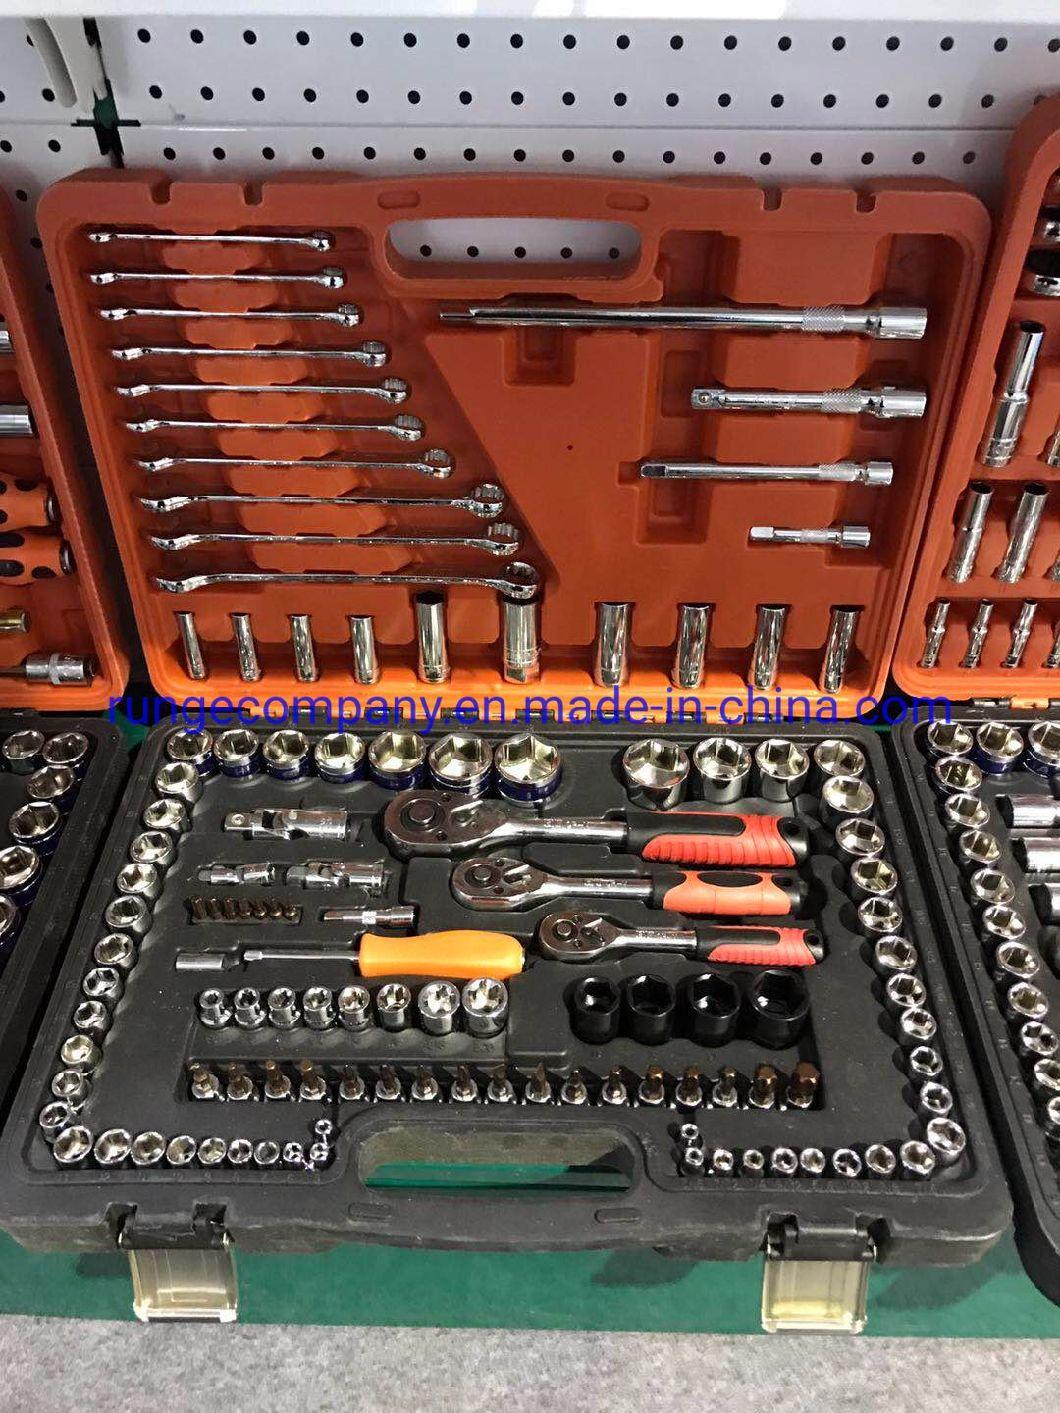 151PCS Household Tool Set General Home/Auto Repair Hand Tool Kit with Hammer Pliers Wrenches Sockets and Toolbox Storage Case